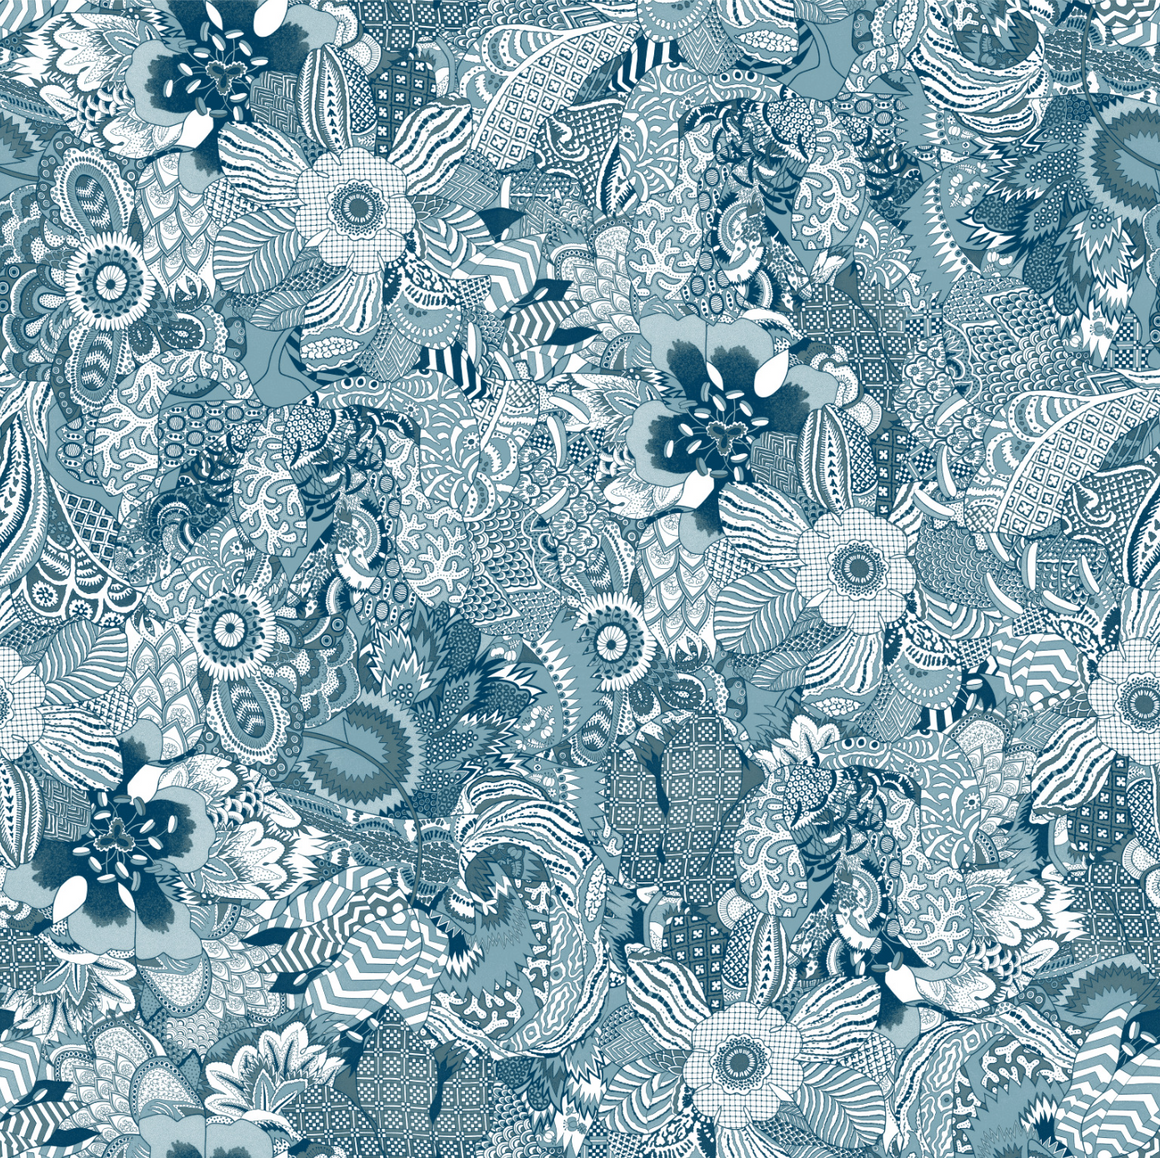 Danielle Rollins "Carlyle" Fabric in Marine